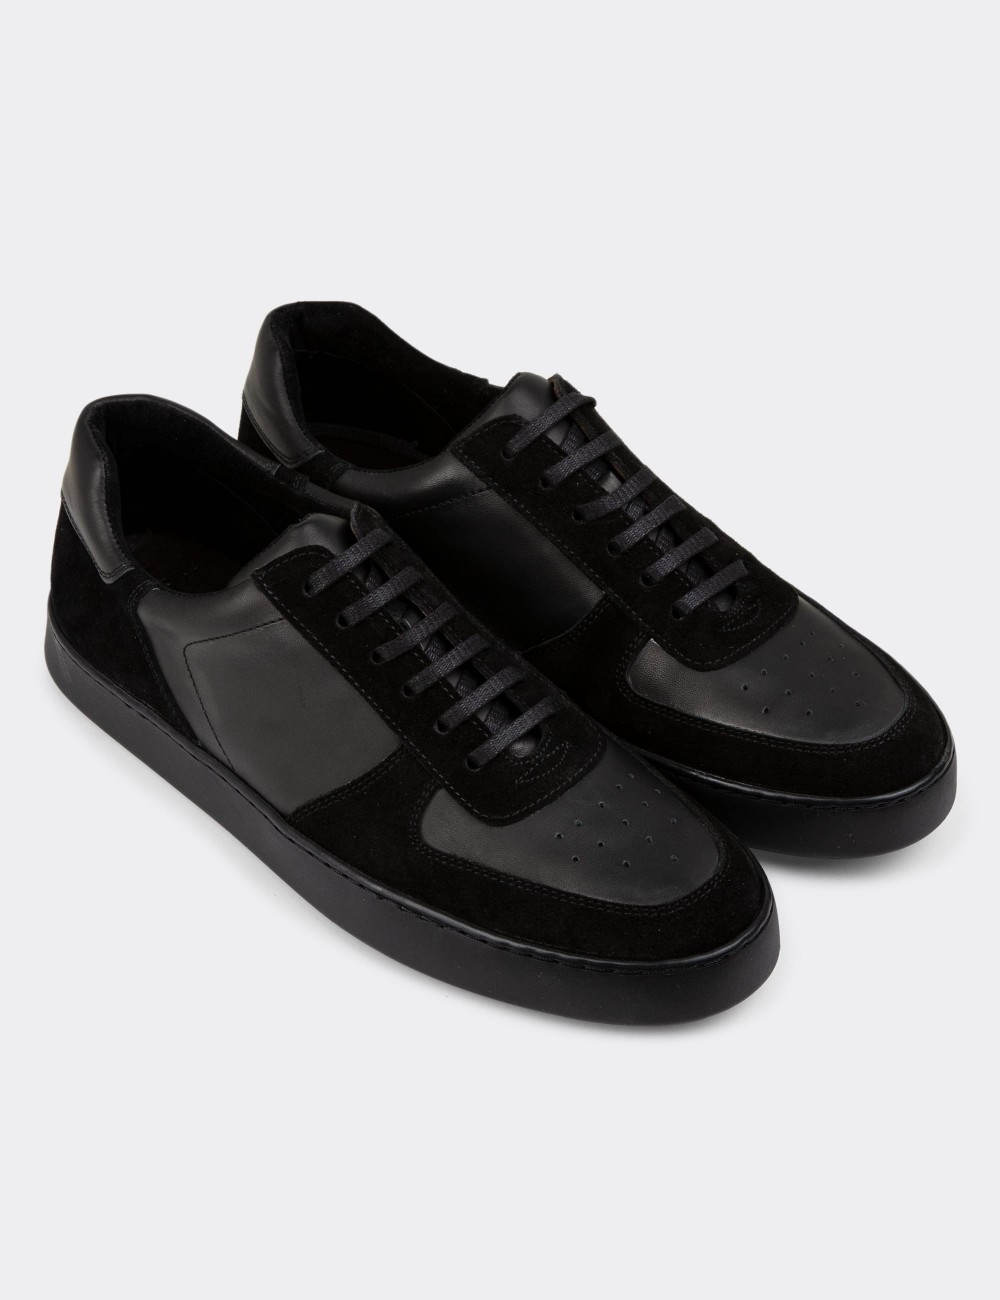 Black Leather Sneakers - 01860MSYHC02